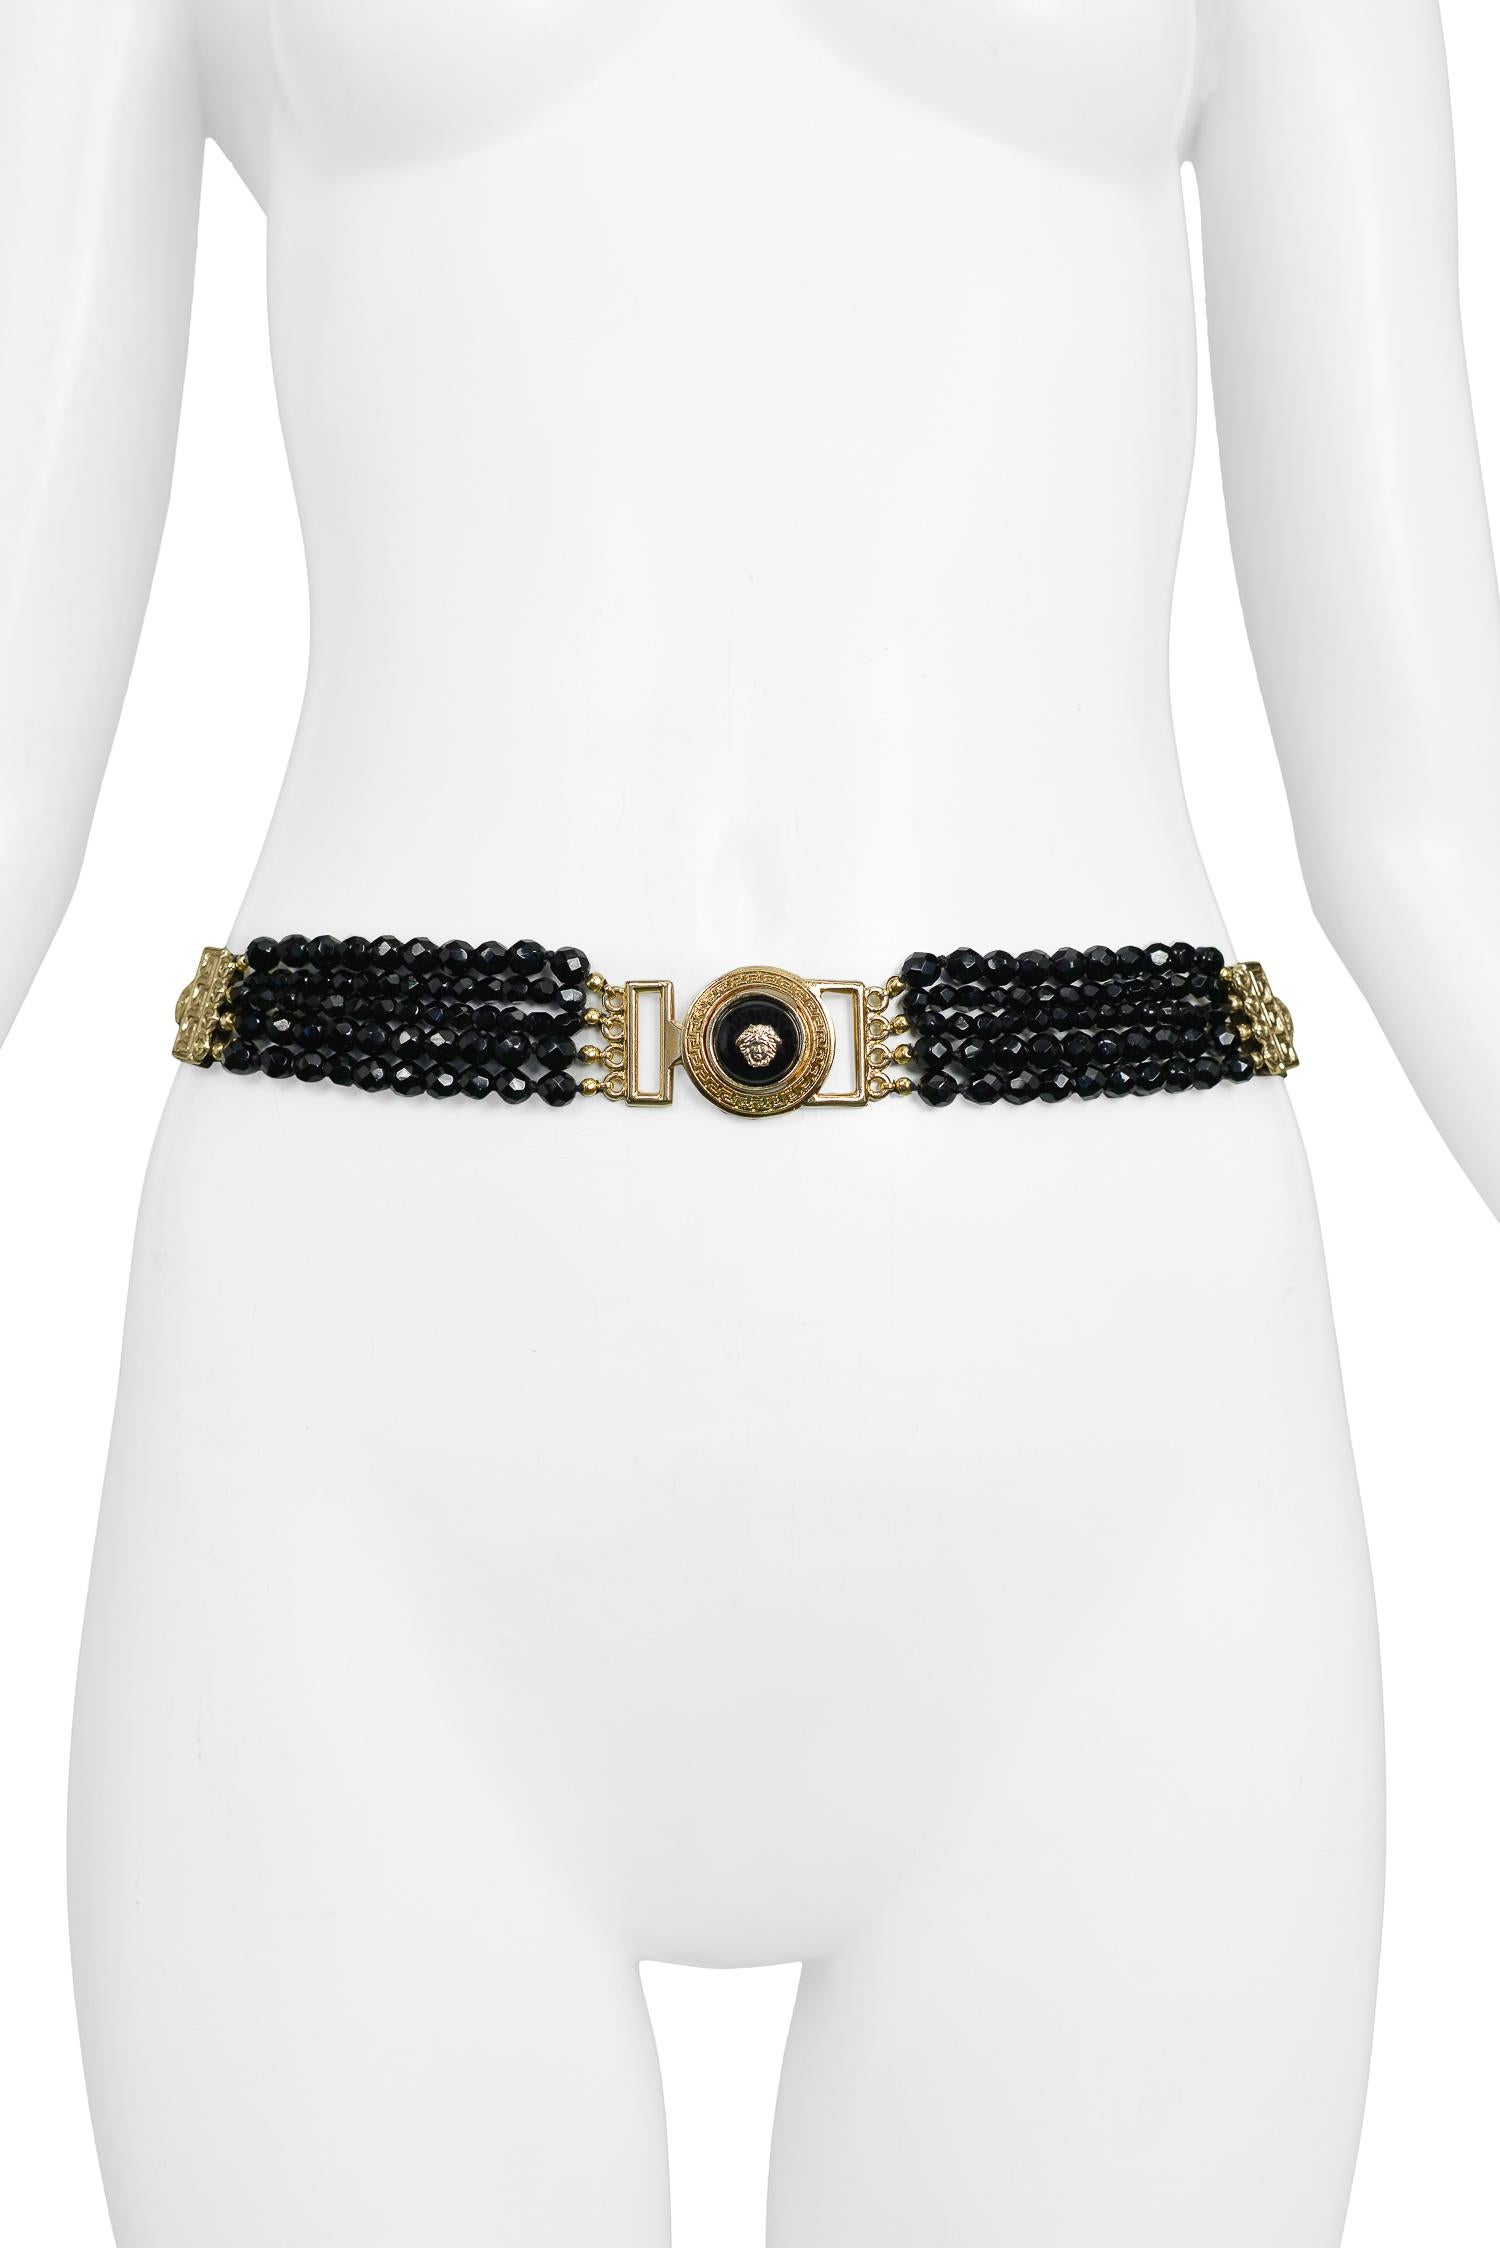 Vintage Gianni Versace black patent leather and multistrand faceted beaded belt featuring gold tone Medusa medallions. From the Autumn/Winter 1994 Collection. 

Excellent Condition. 